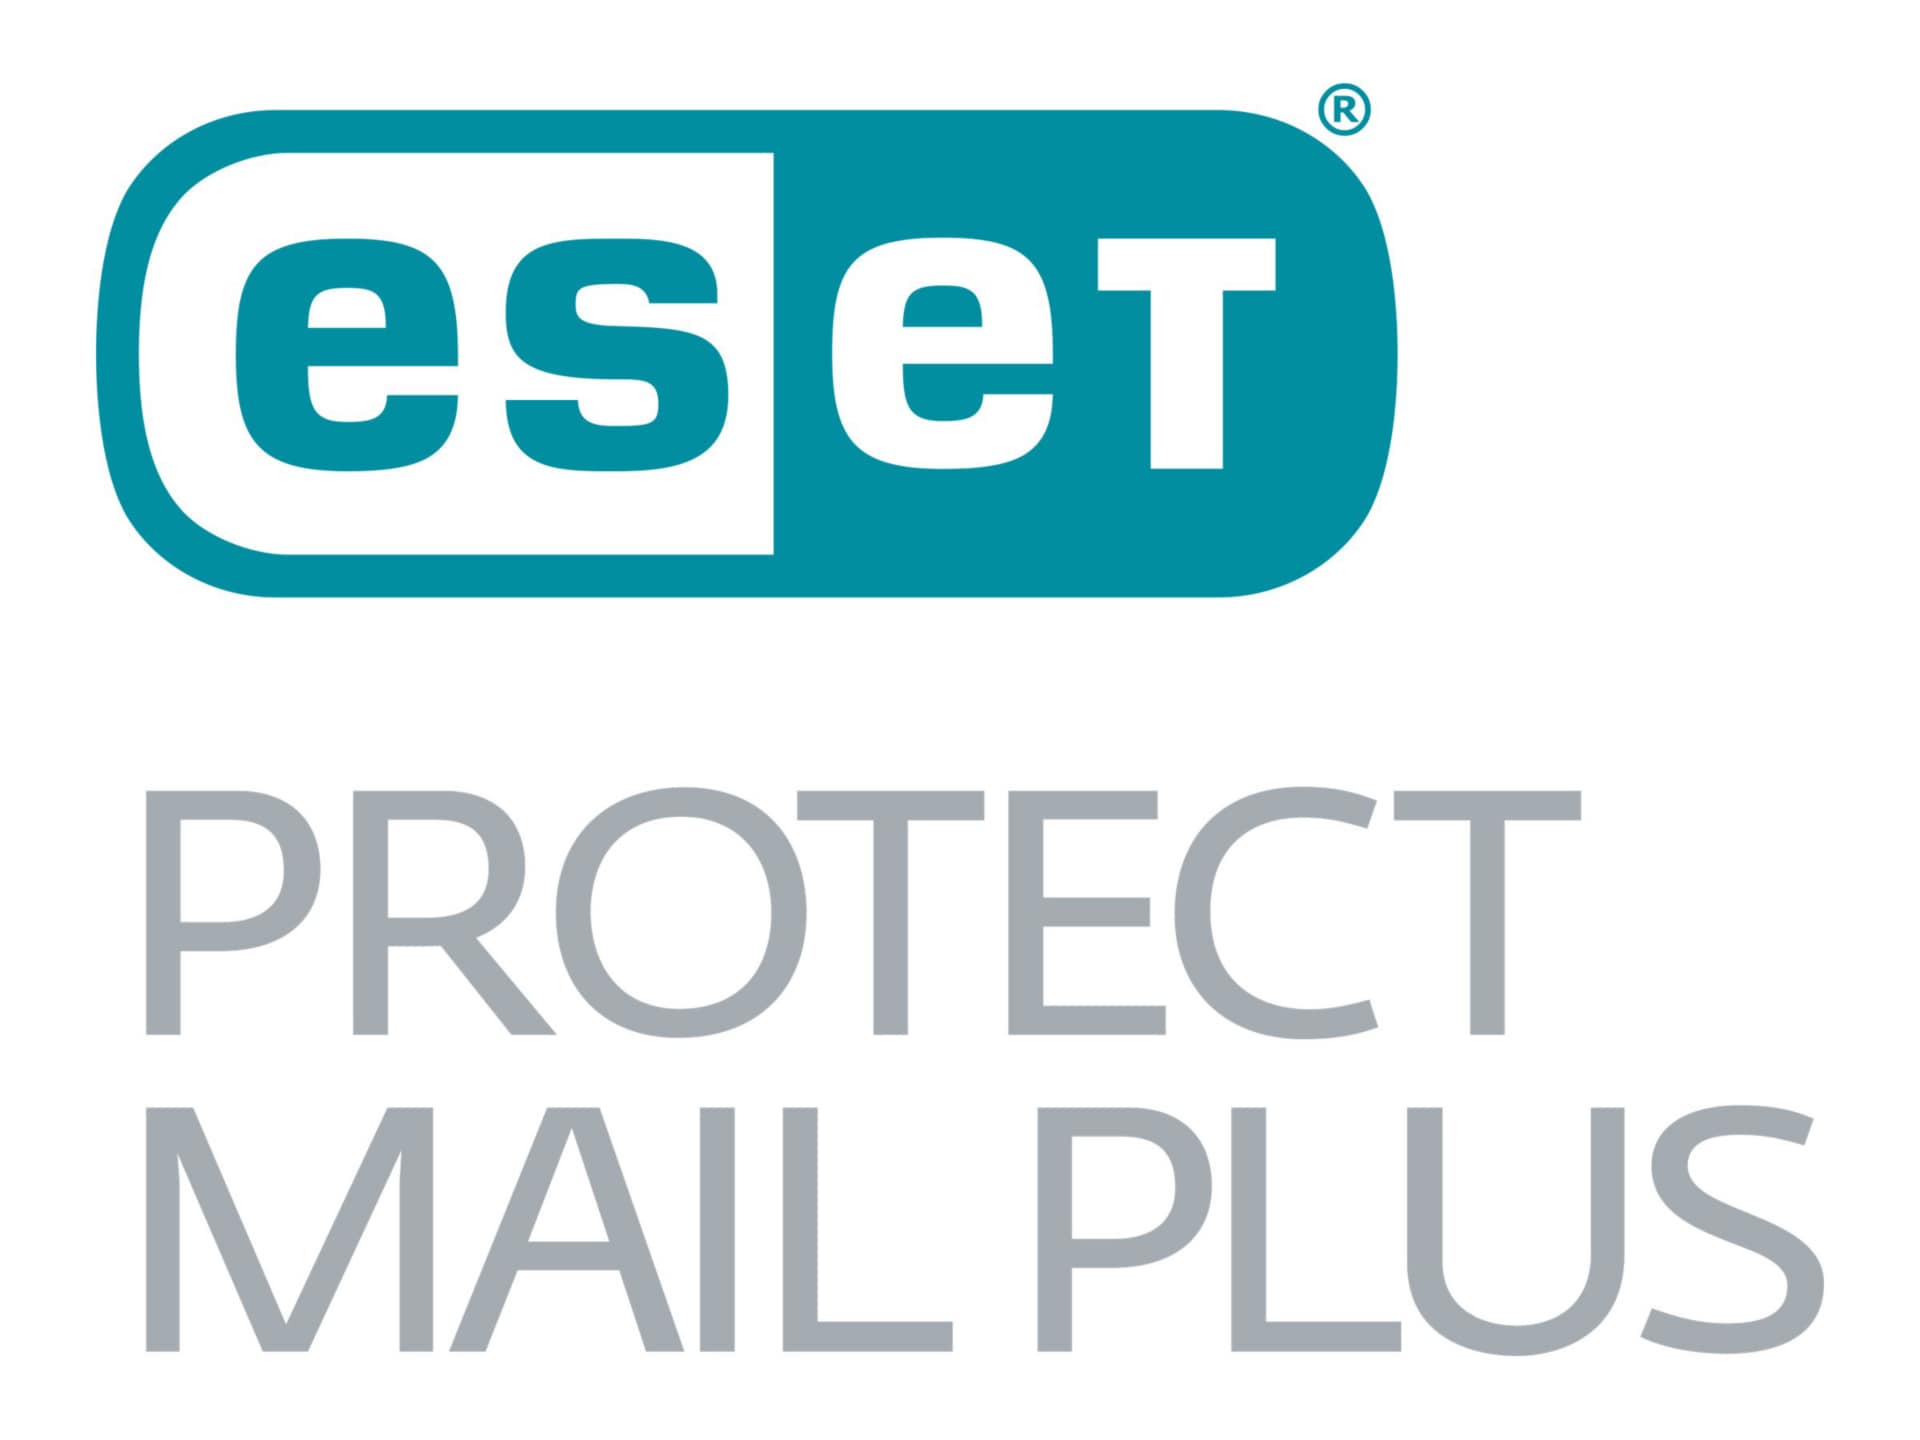 ESET PROTECT Mail Plus - subscription license (1 year) - 1 seat